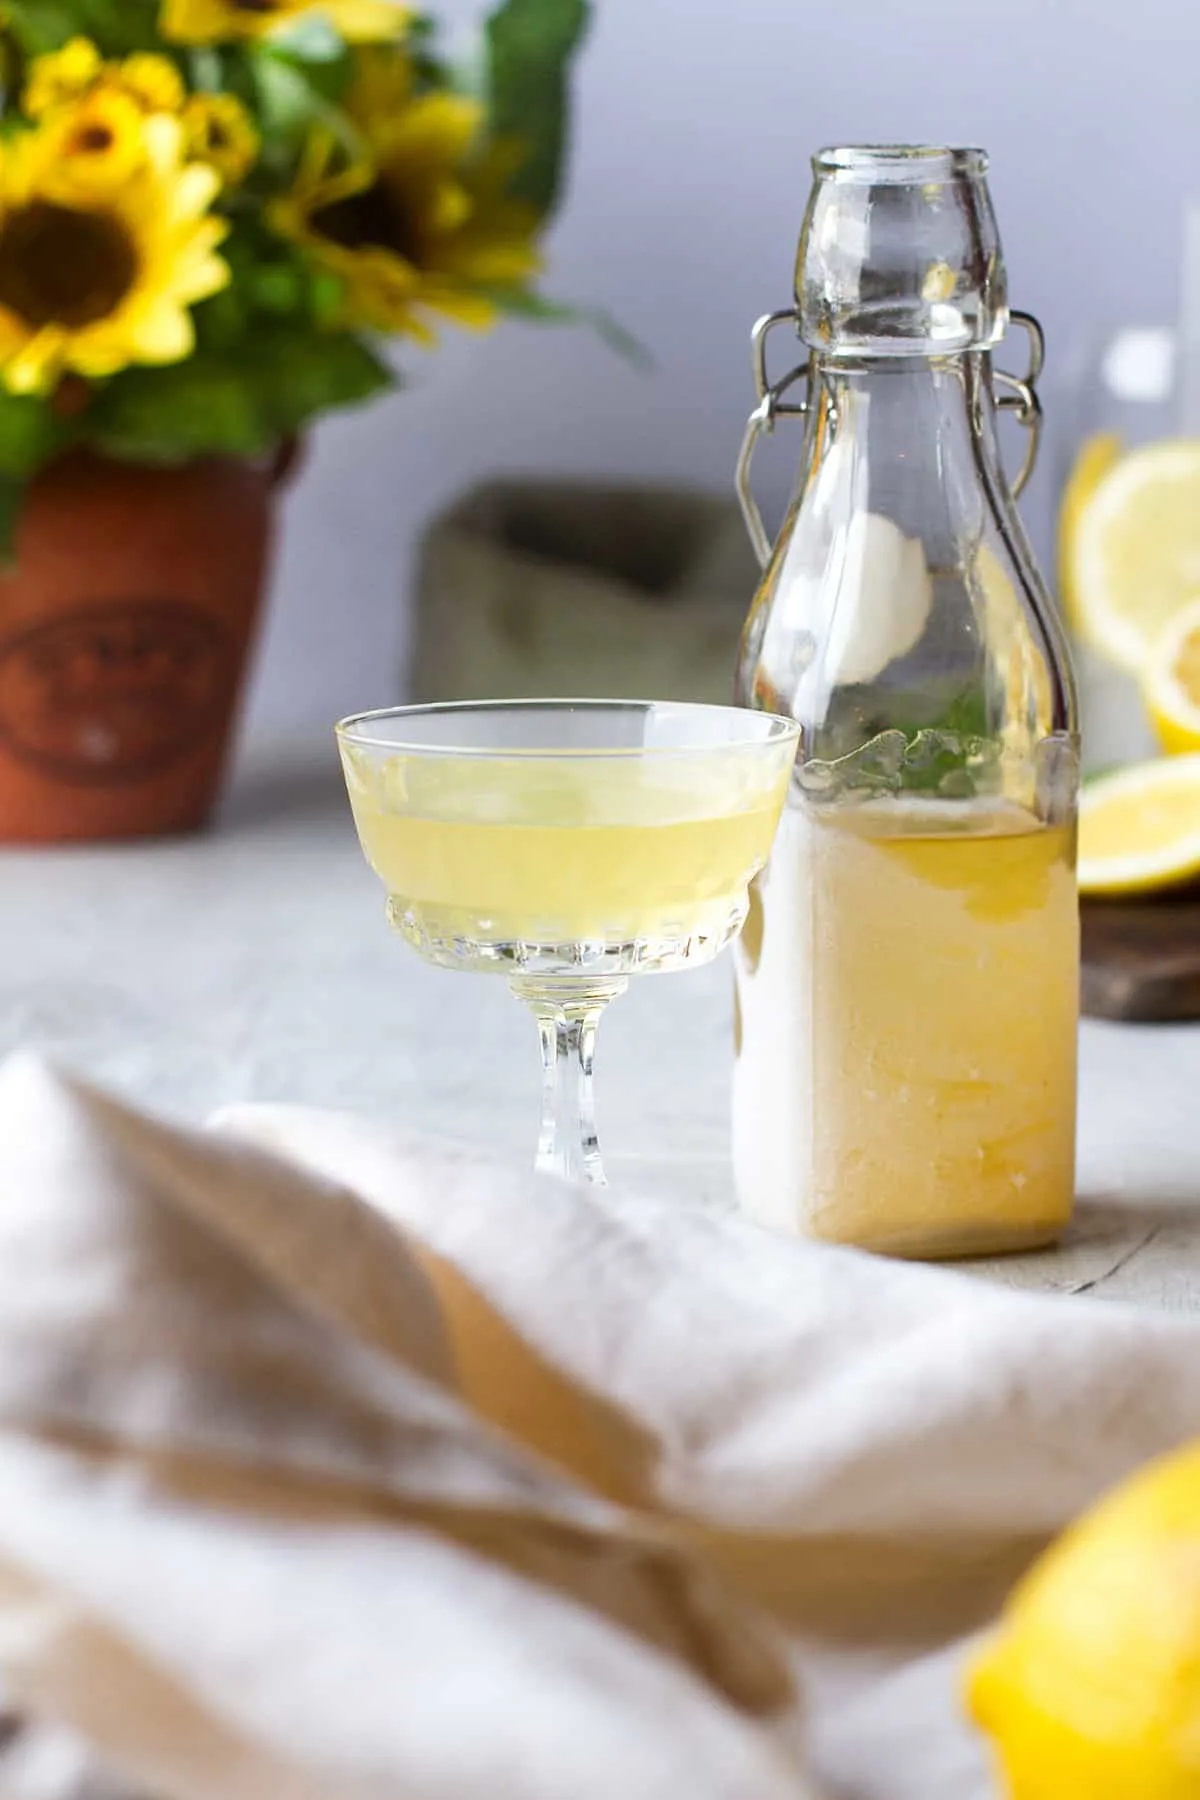 A vintage glass with limoncello and a bottle of chilled limoncello on the side.